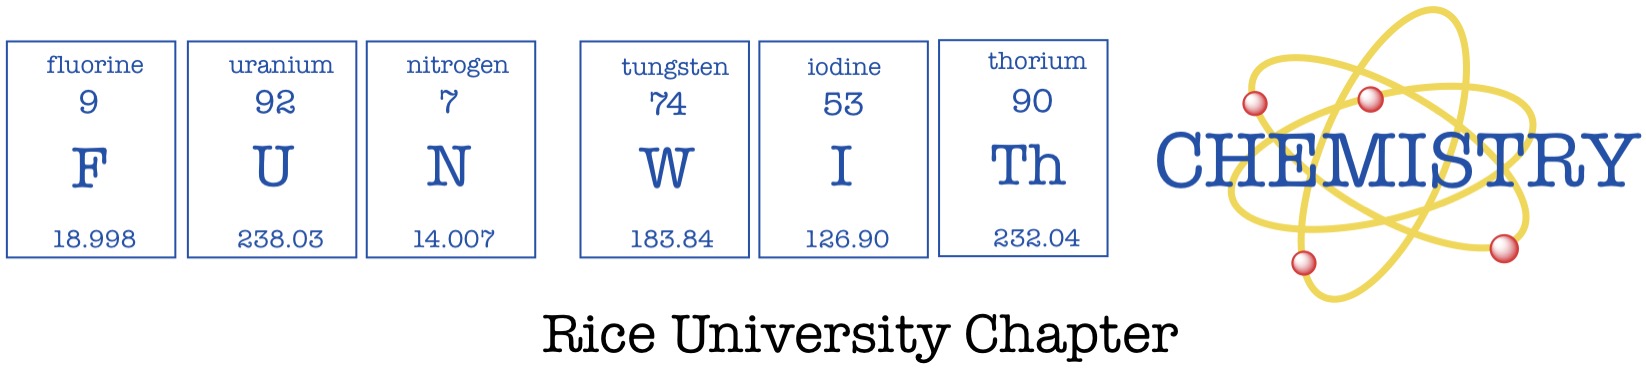 Fun With Chemistry: Rice University Chapter